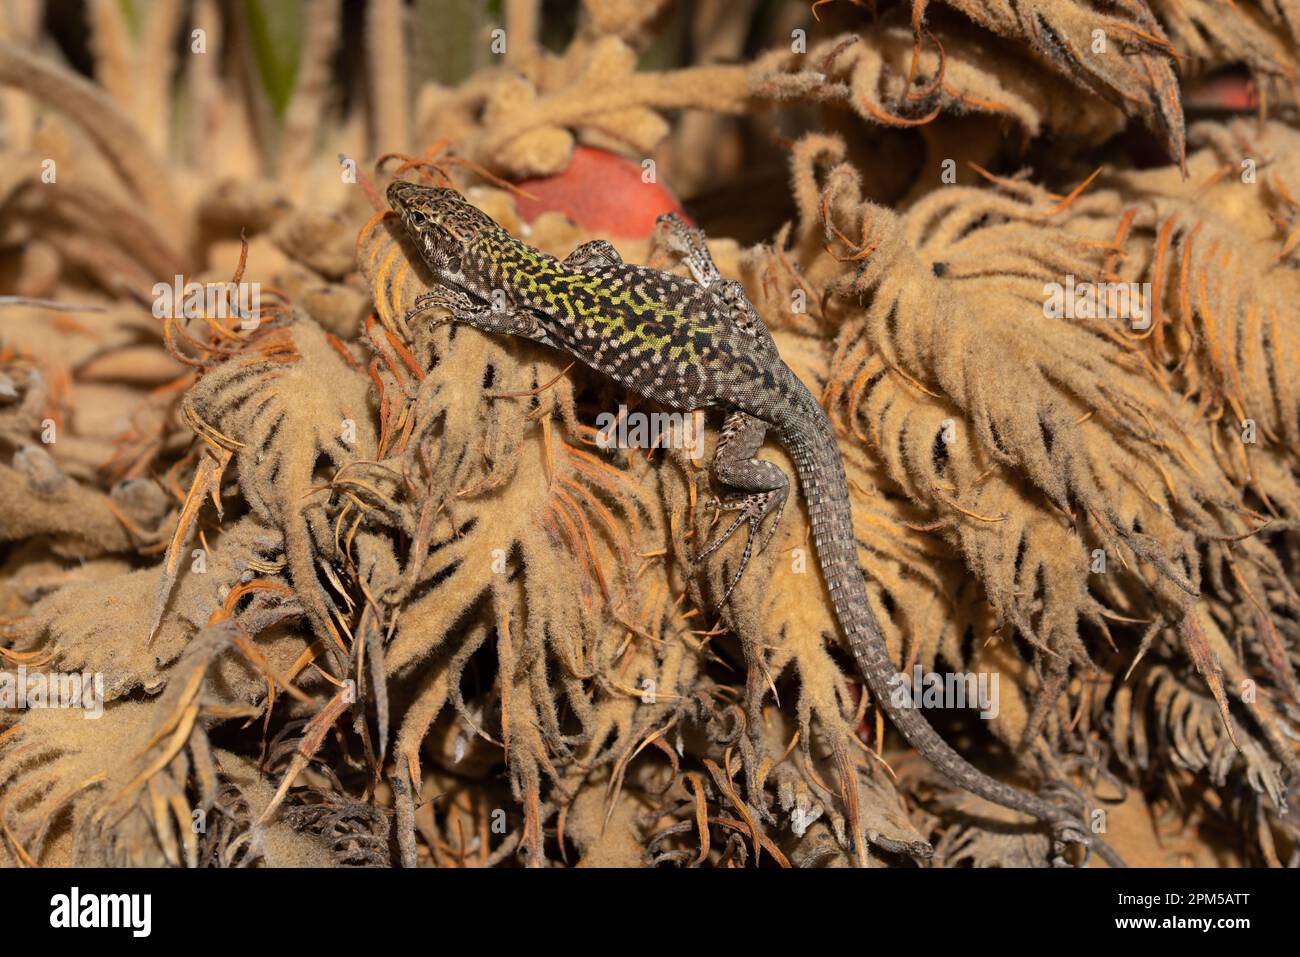 A wall lizard (Podarcis) clambers on dry palm fronds and suns itself in Italy. The reptile is striped green and black. Stock Photo